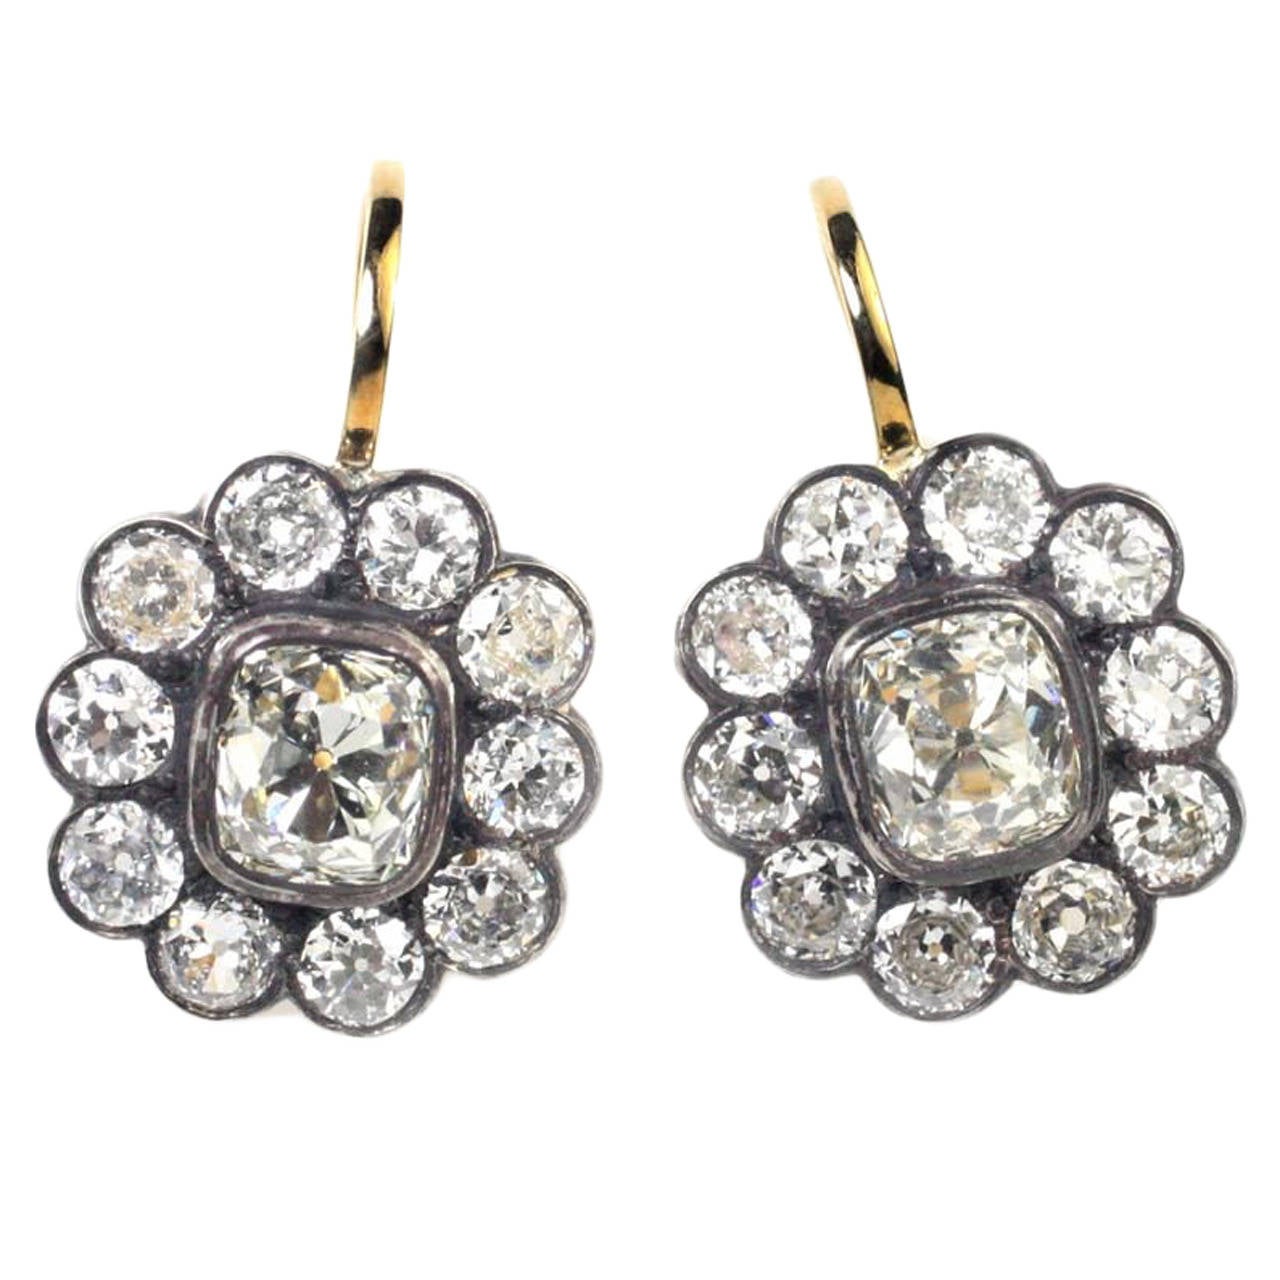 Julius Cohen Old Mine Cut Diamond Cluster Earrings For Sale at 1stdibs